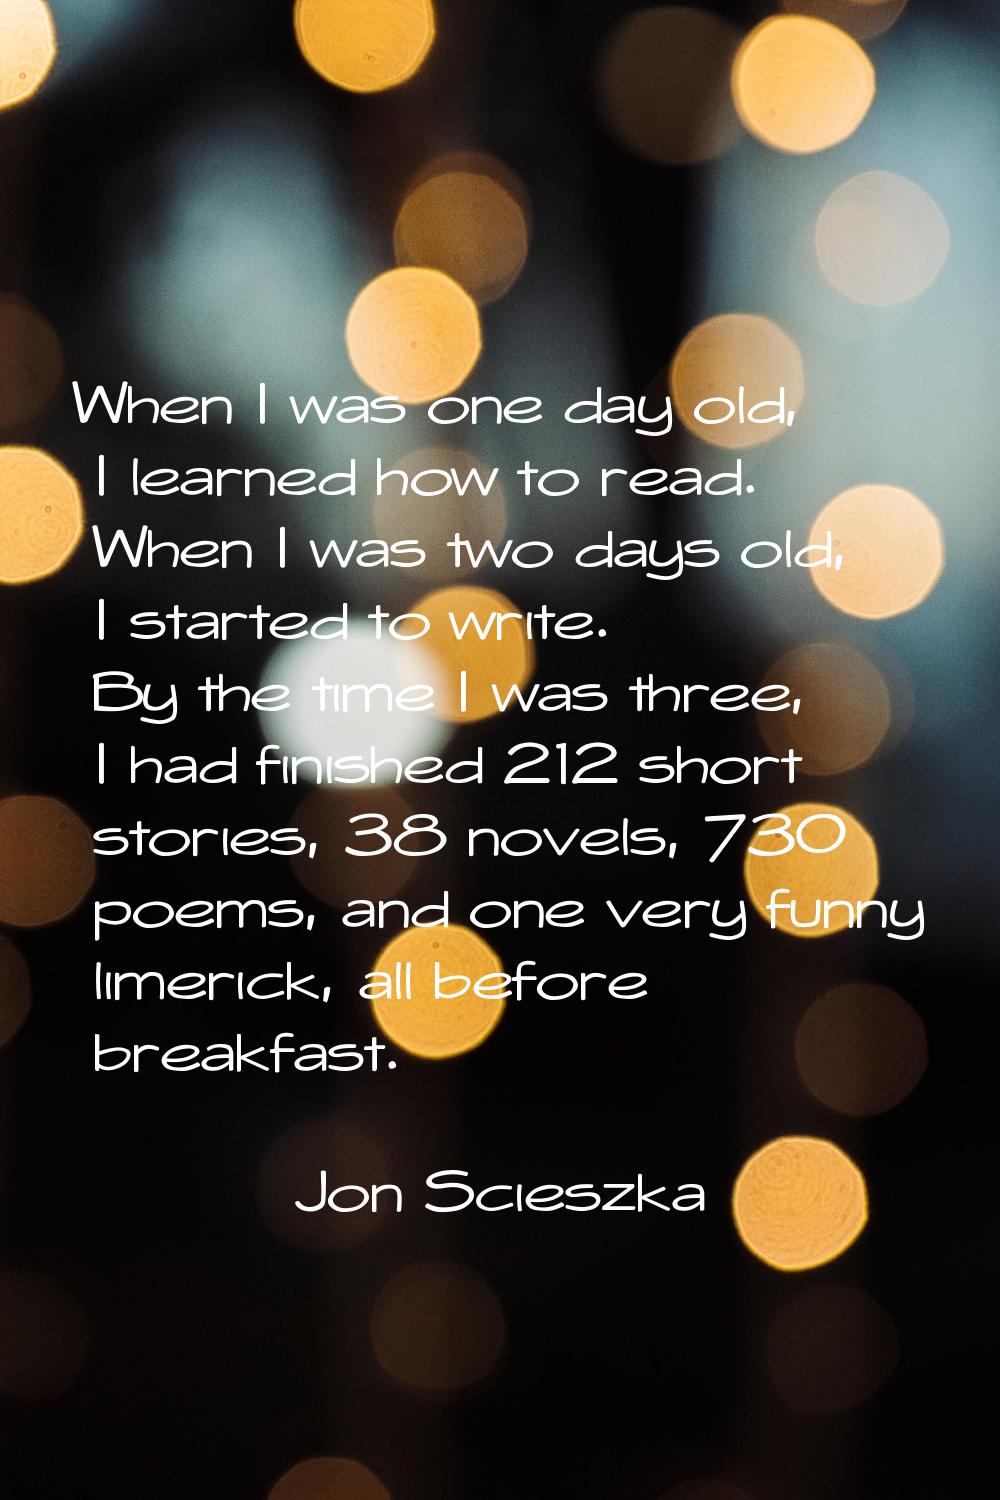 When I was one day old, I learned how to read. When I was two days old, I started to write. By the 